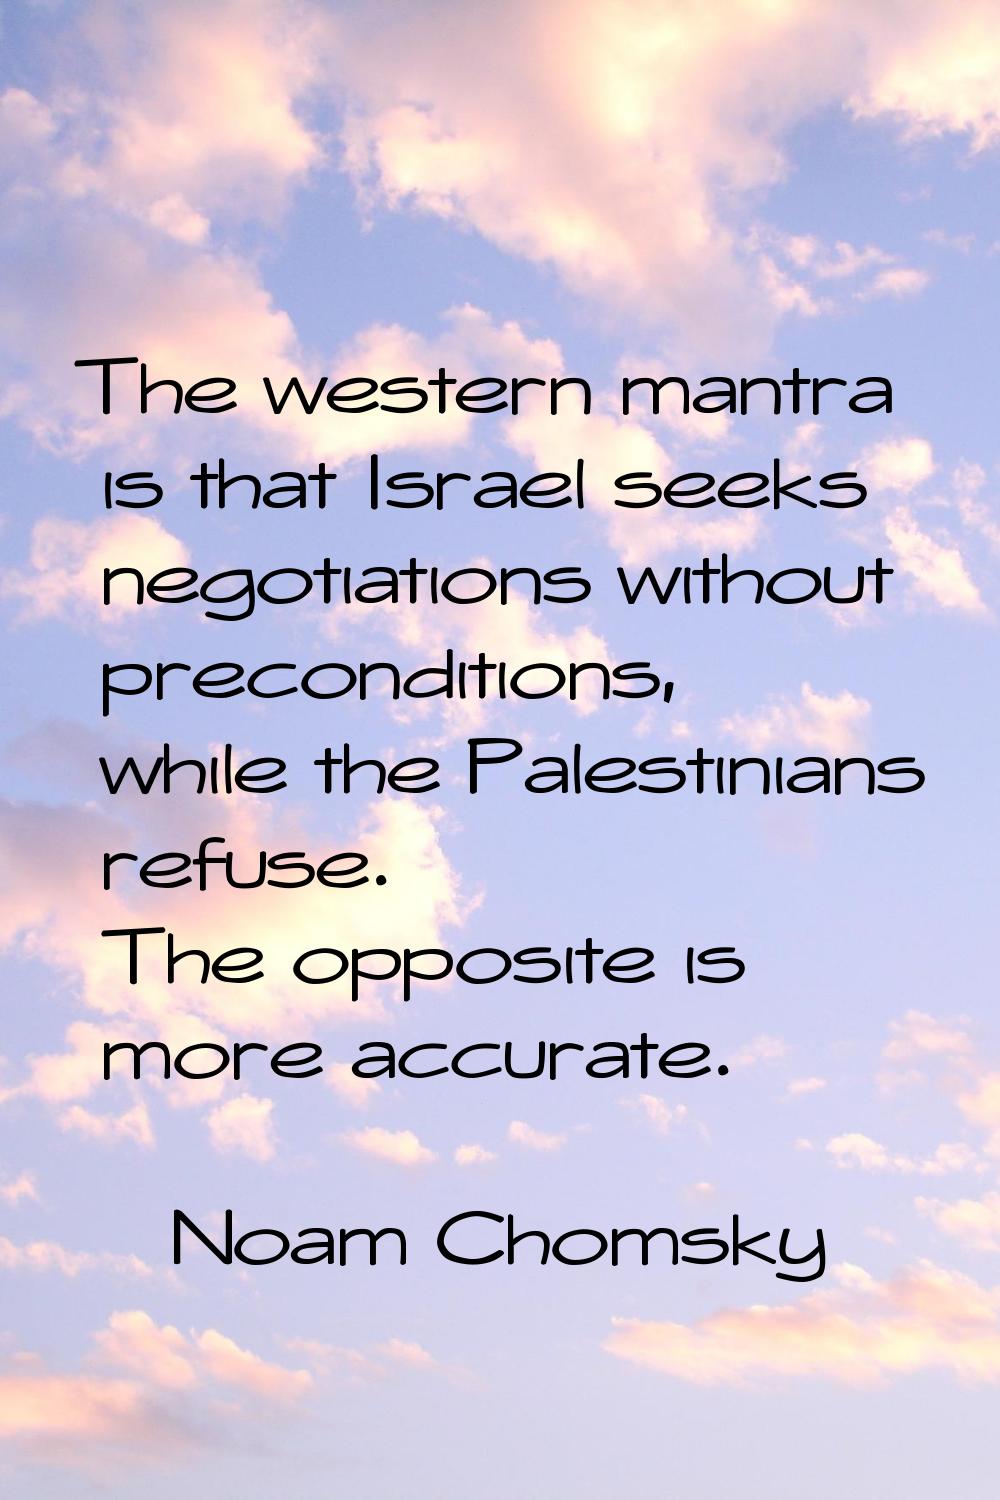 The western mantra is that Israel seeks negotiations without preconditions, while the Palestinians 